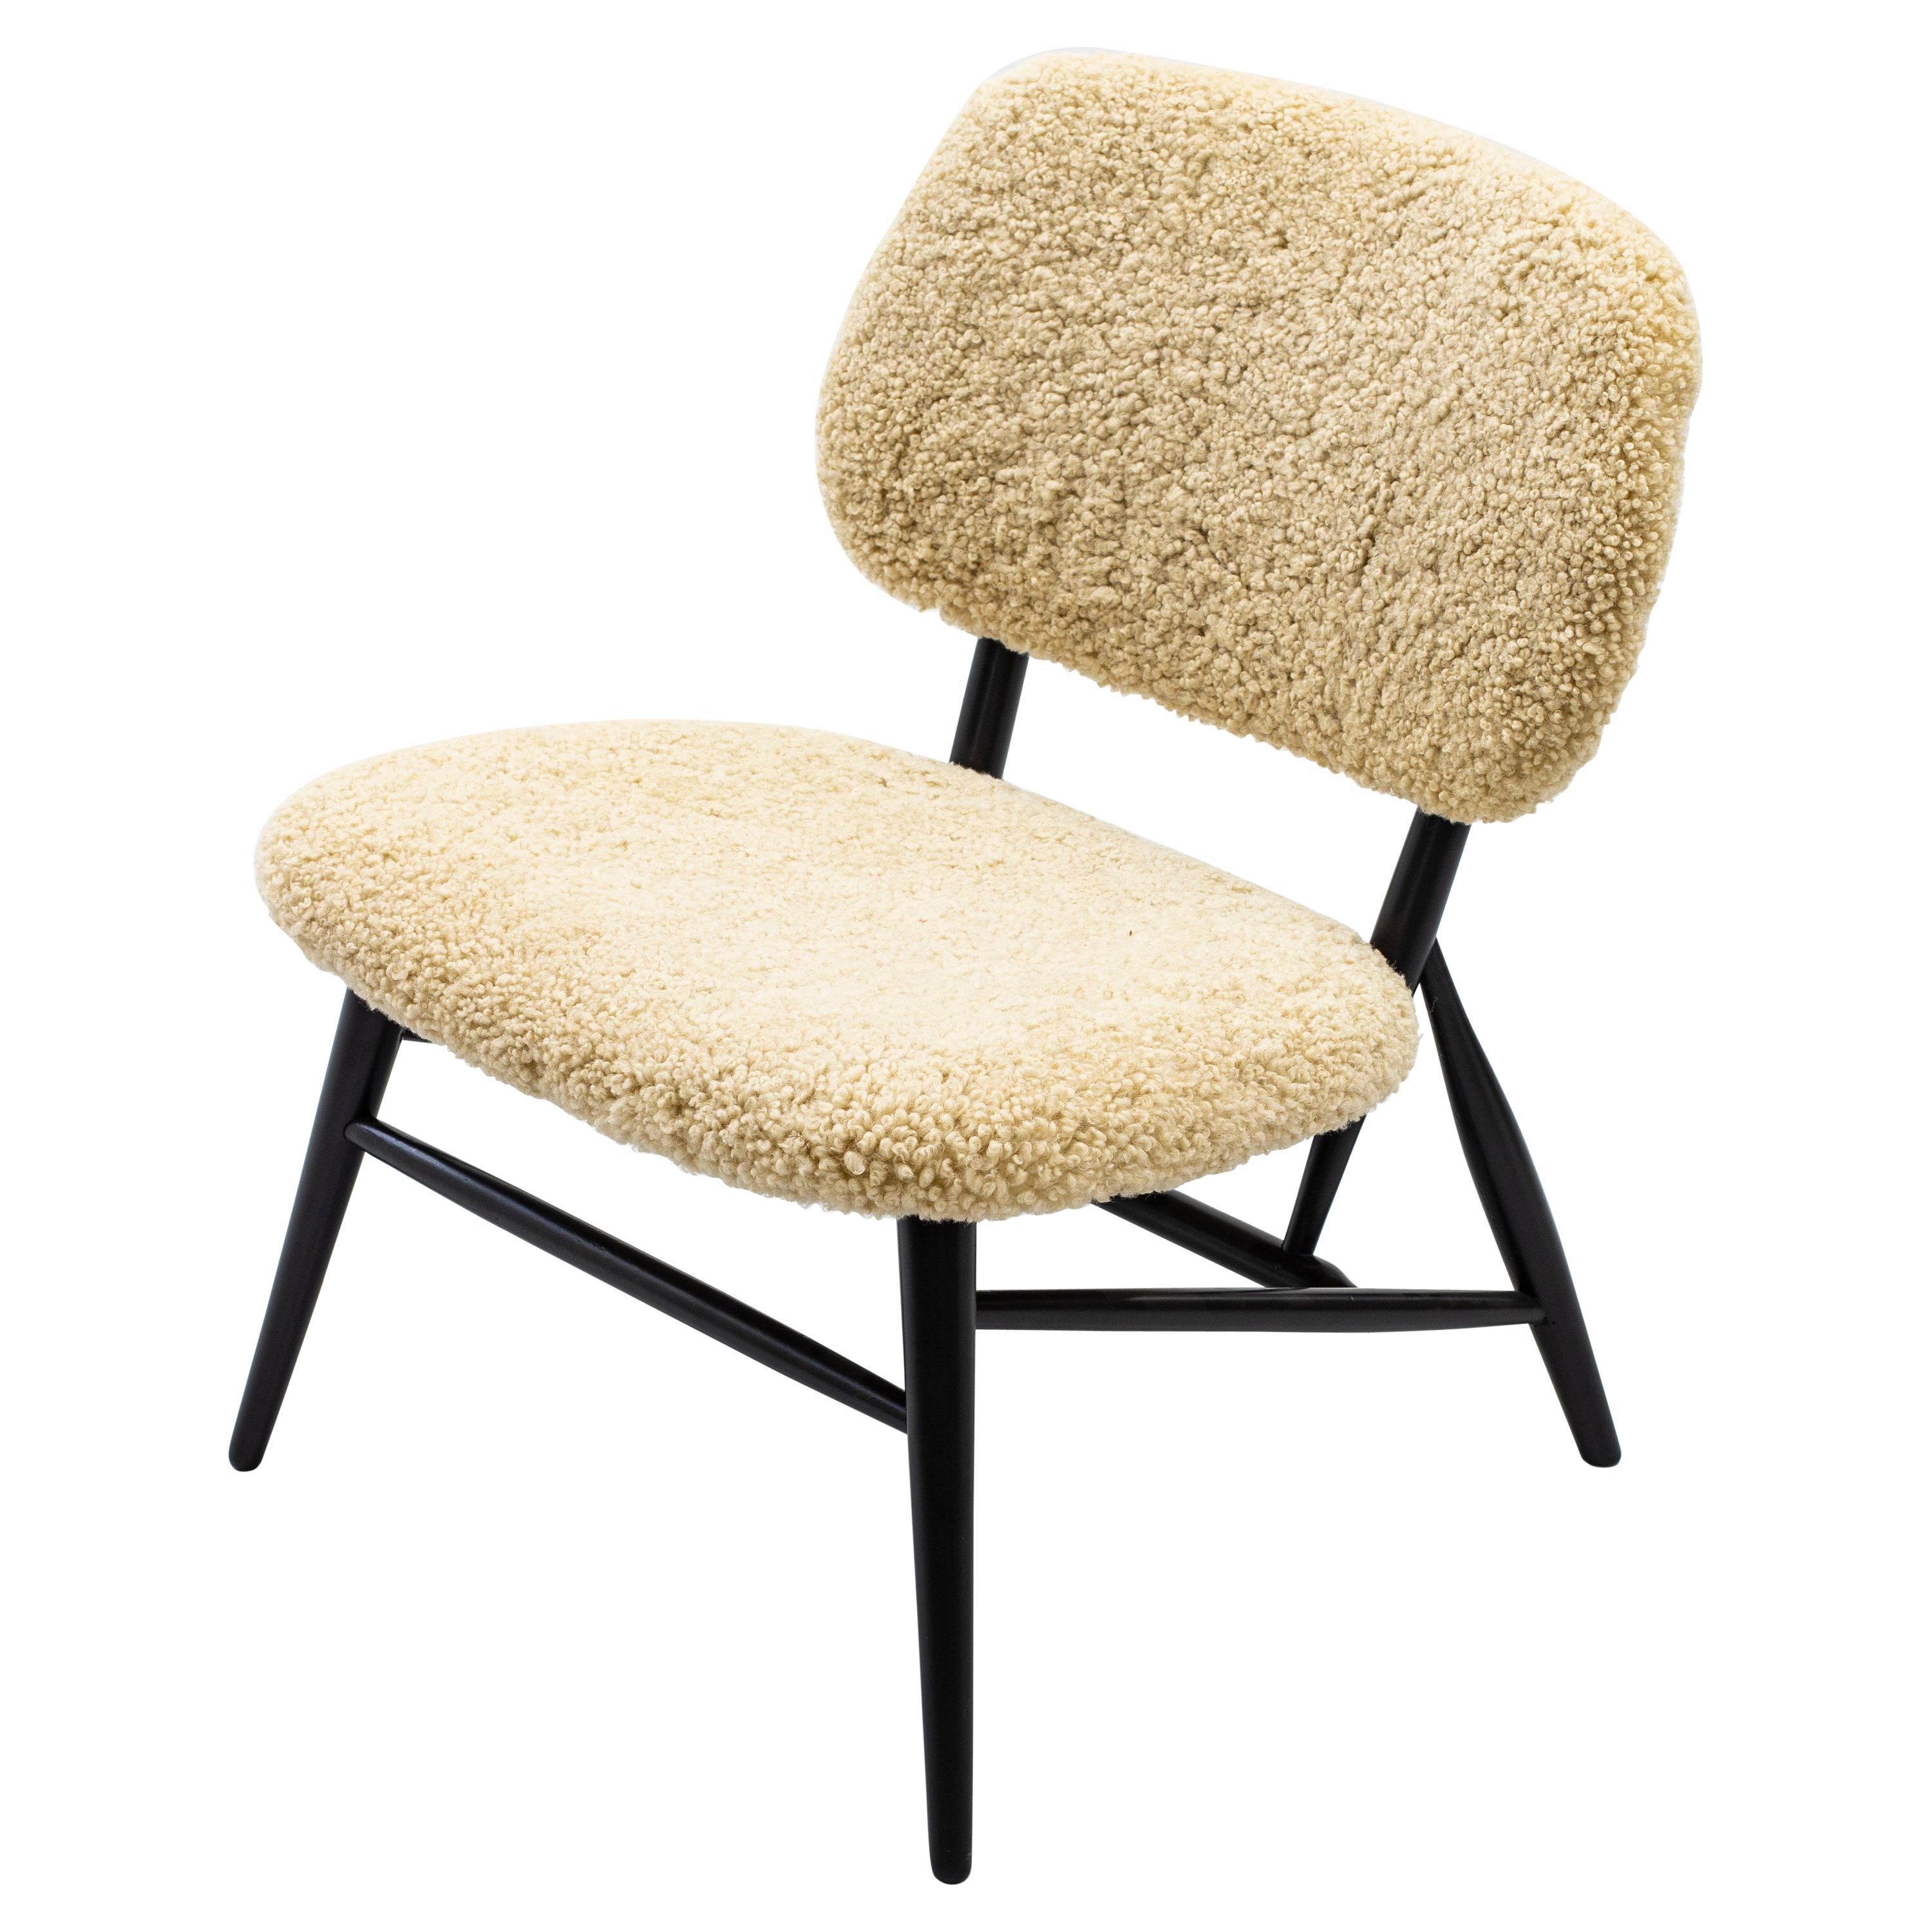 Lounge Chair with Sheep Skin by Slöjd & Möbler, in the Manner of Alf Svensson